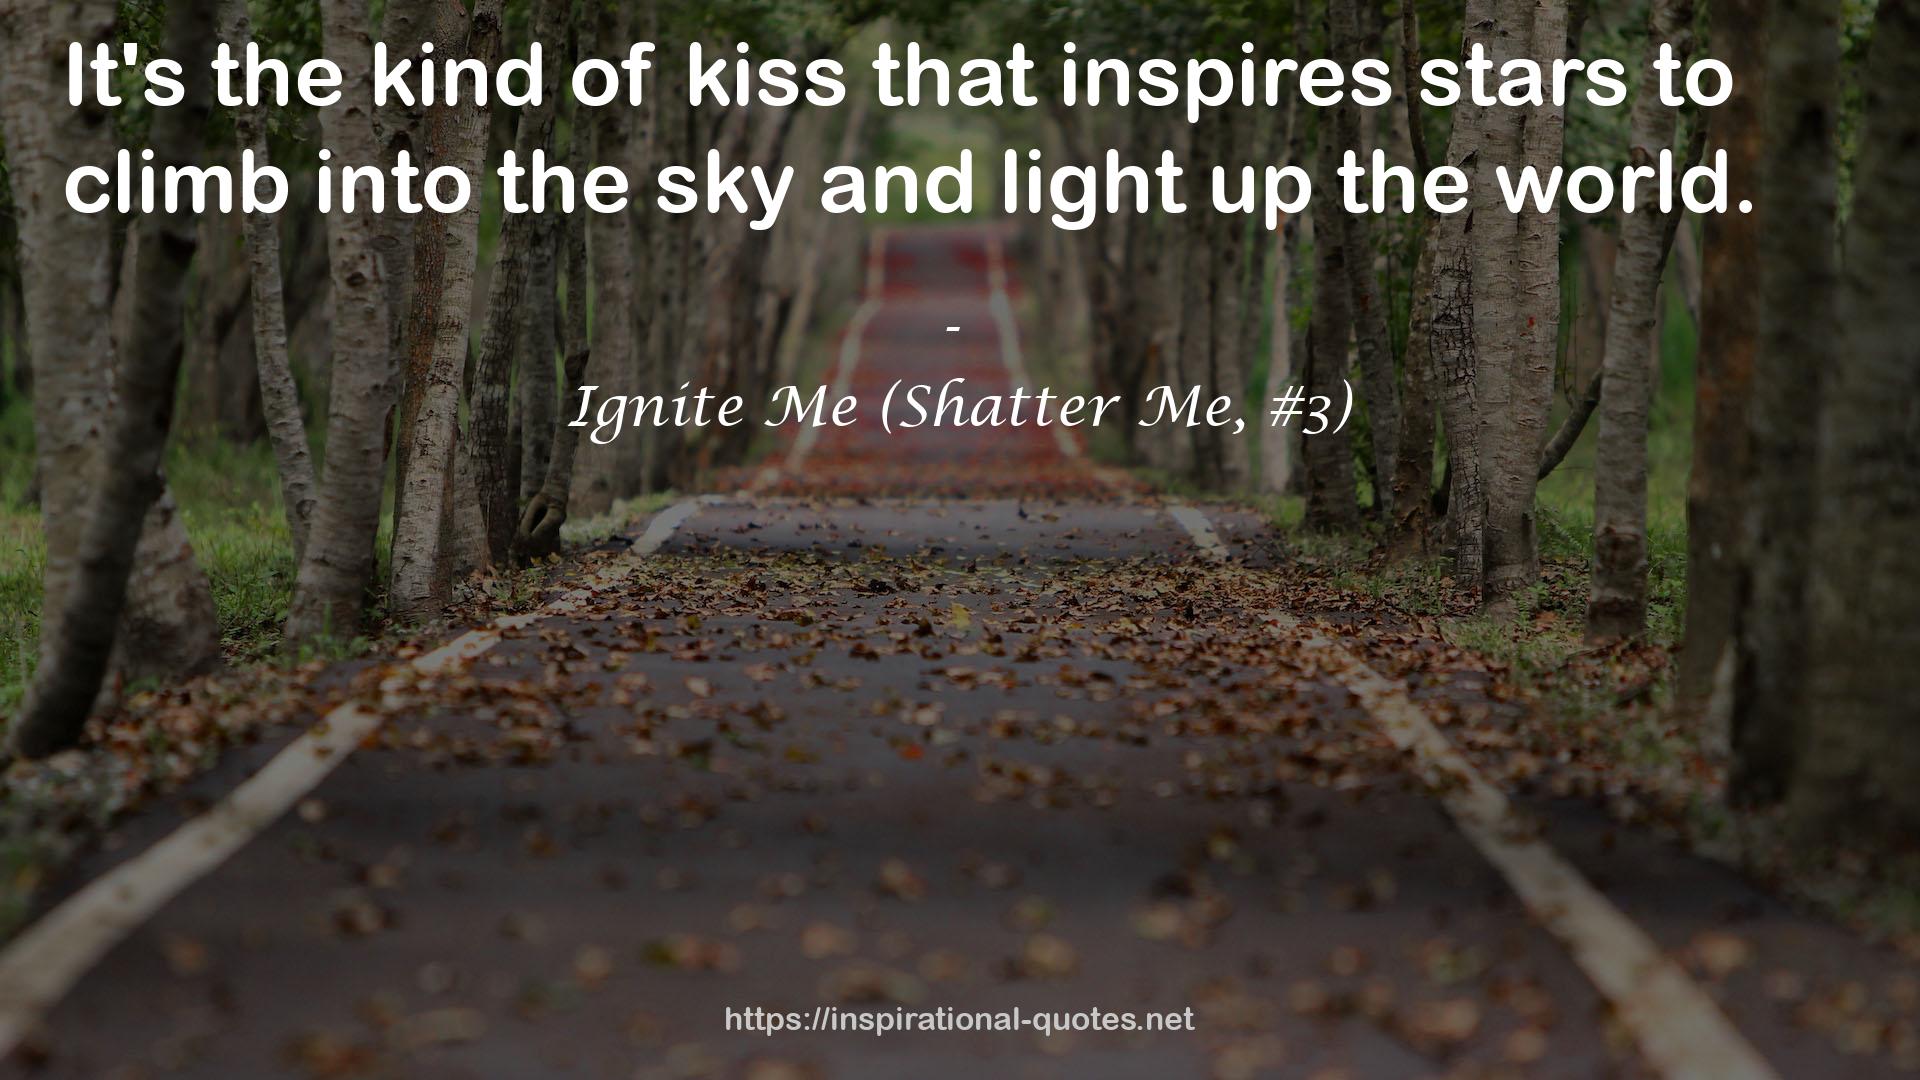 Ignite Me (Shatter Me, #3) QUOTES